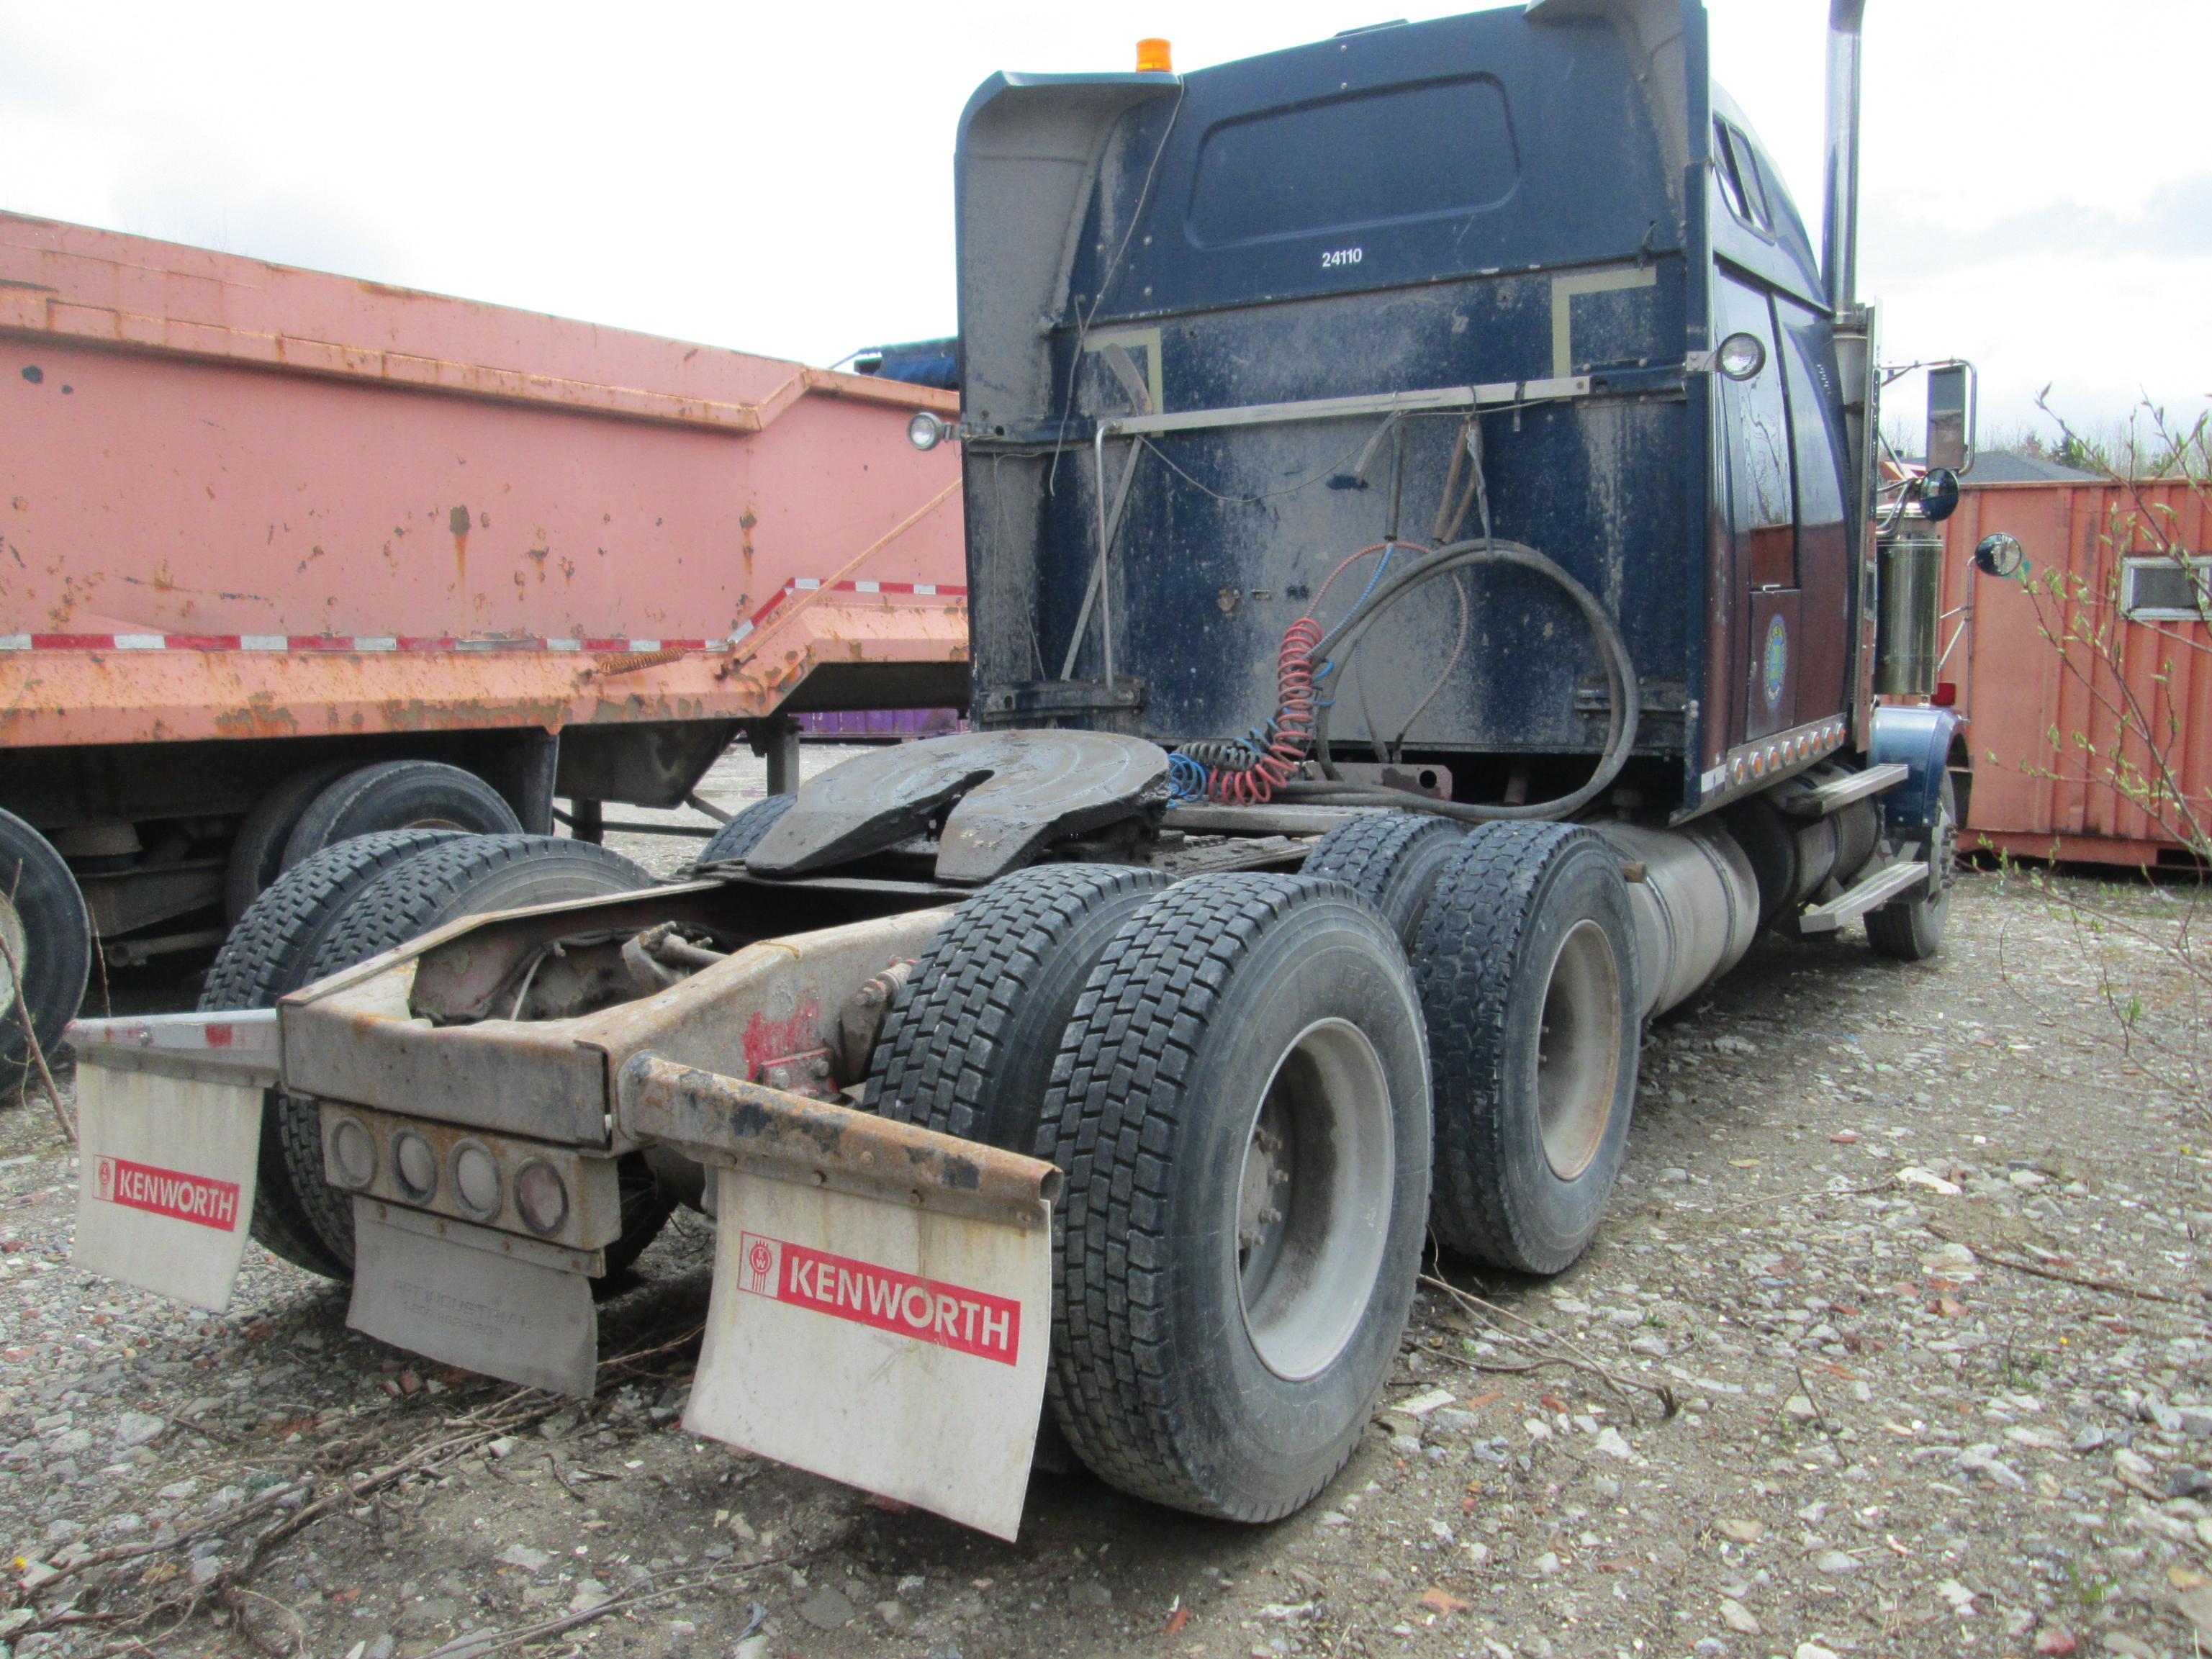 TRUCK TRACTOR 2004 Western Star 4900FA Tandem truck tractor SN 5KJJAECV74PM78244, equipped with